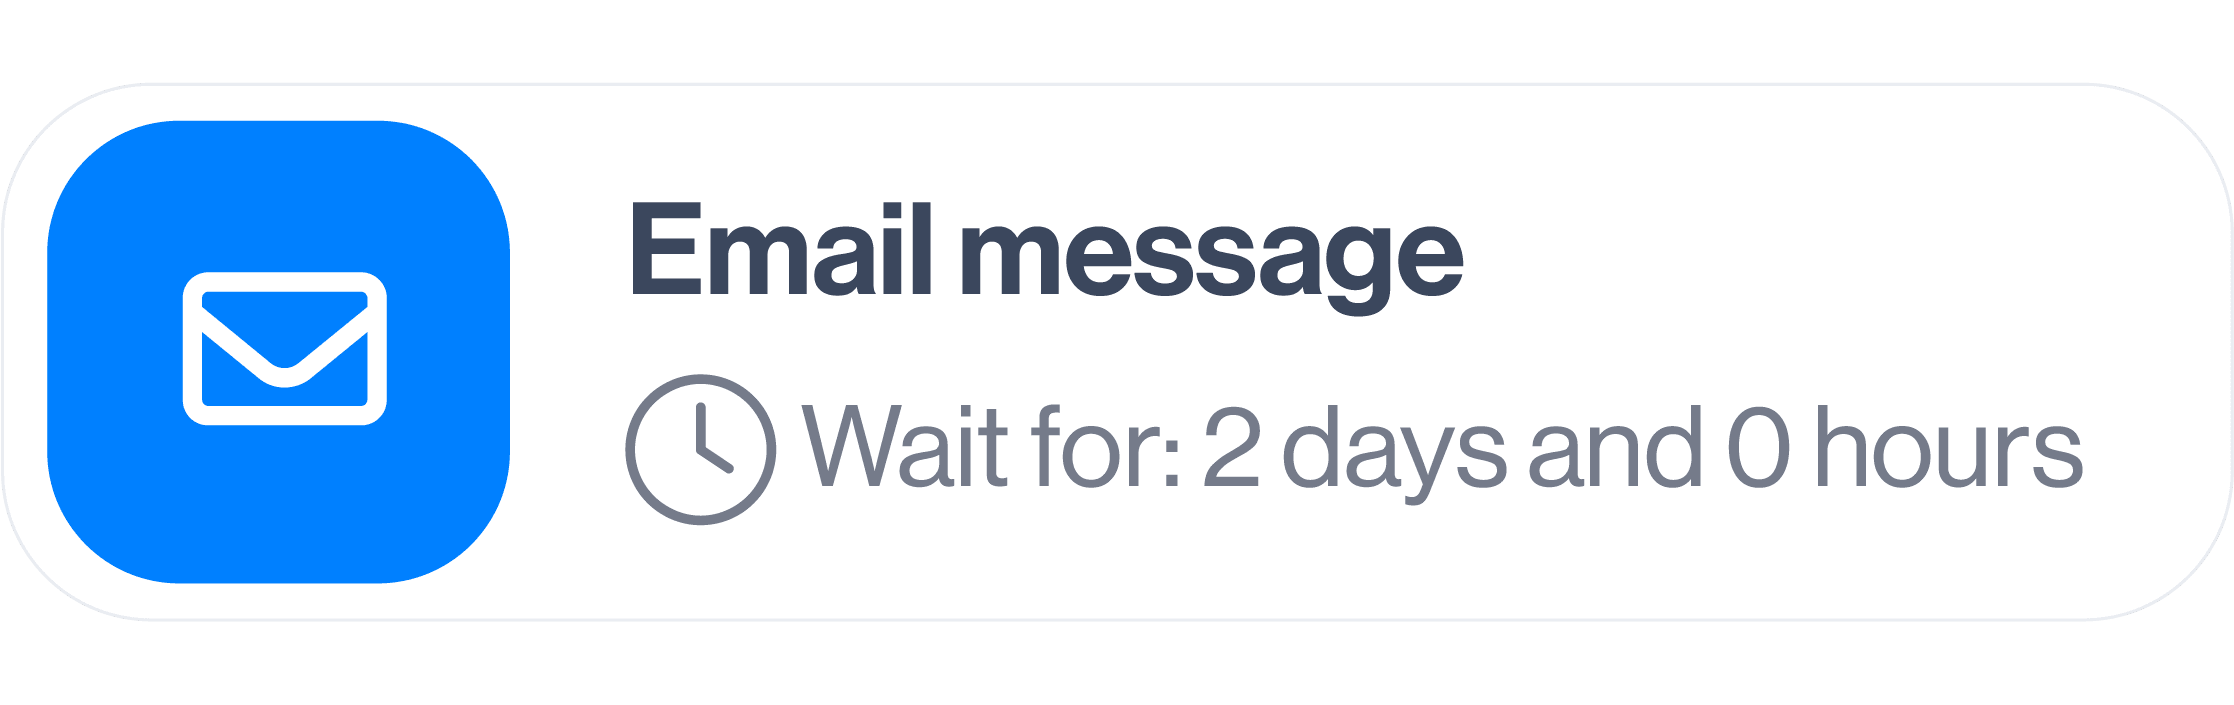 Image of email message step for smart sequence template when reaching out to leads who reacted to a post of an industry expert